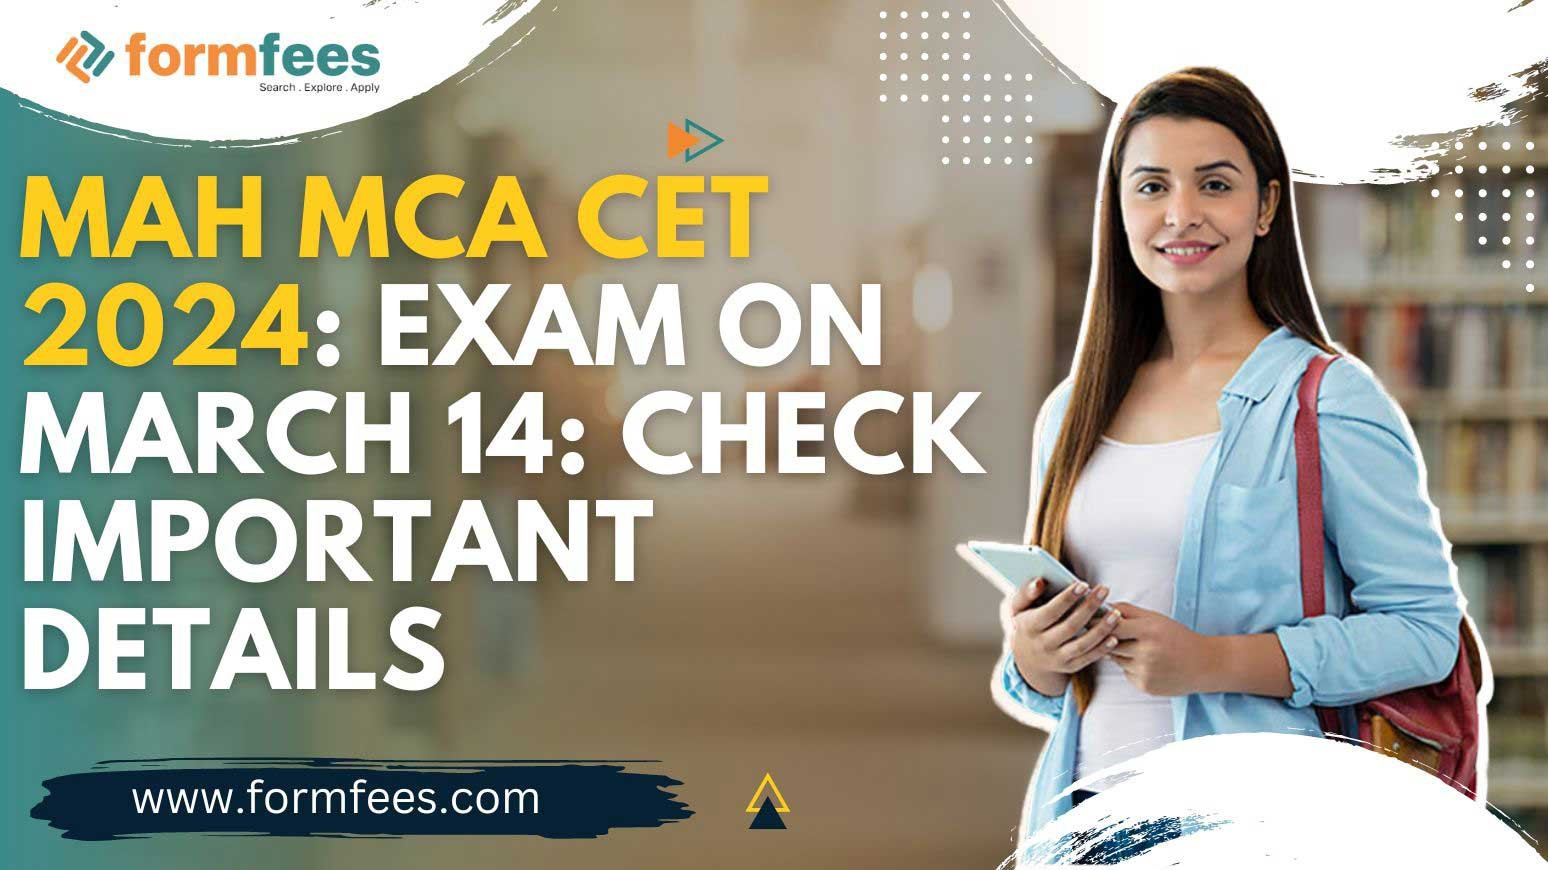 MAH MCA CET 2024: Exam on March 14: Check Important Details